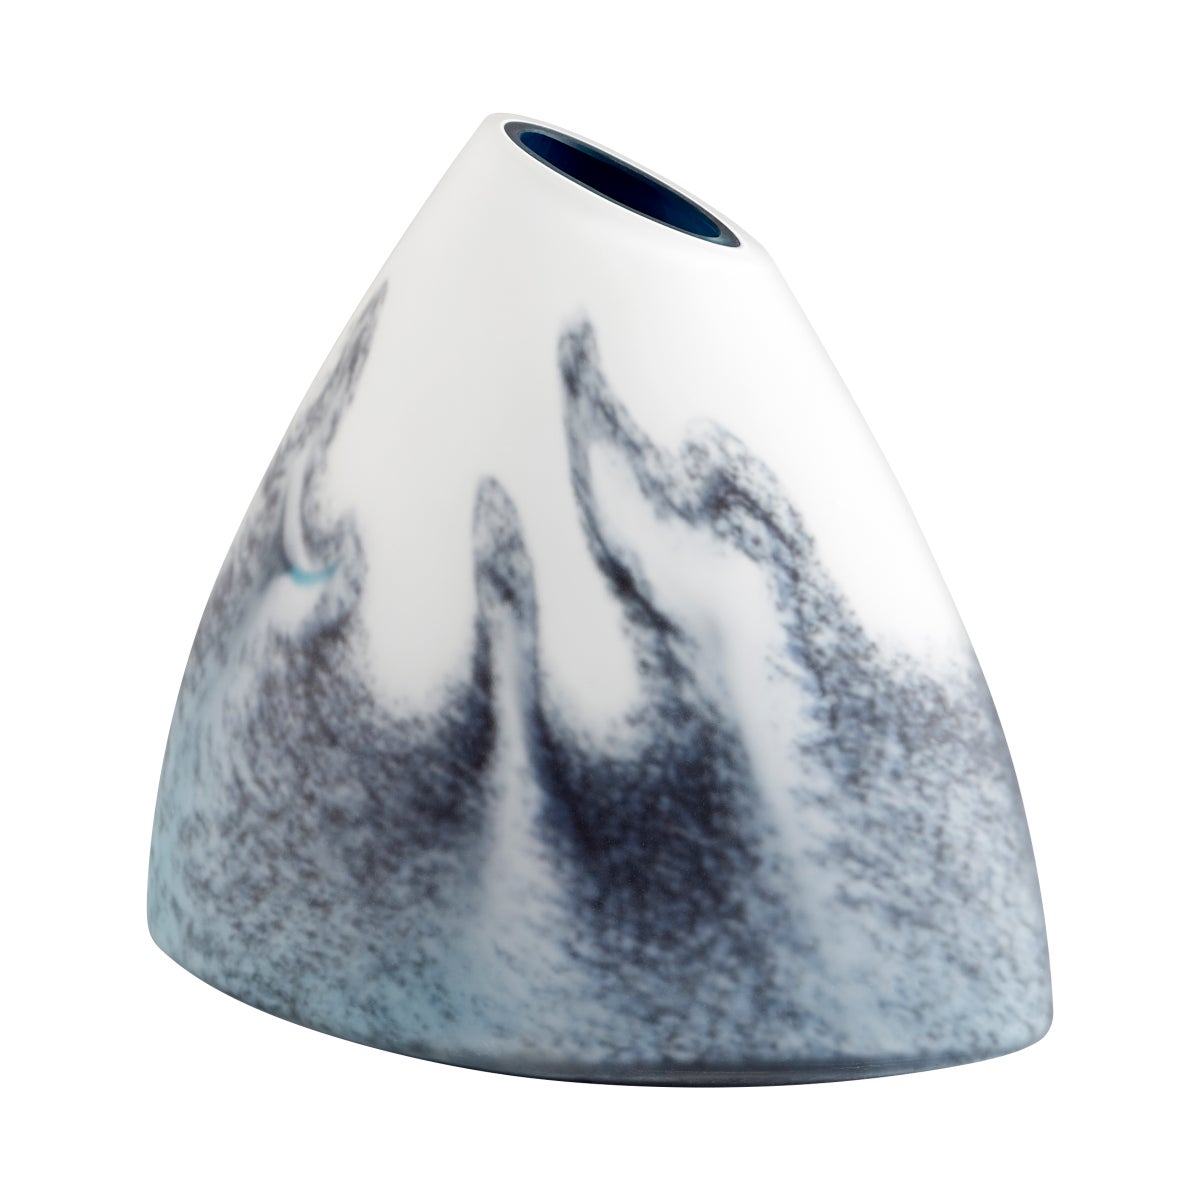 Mystic Falls Vase - Blue And White Small